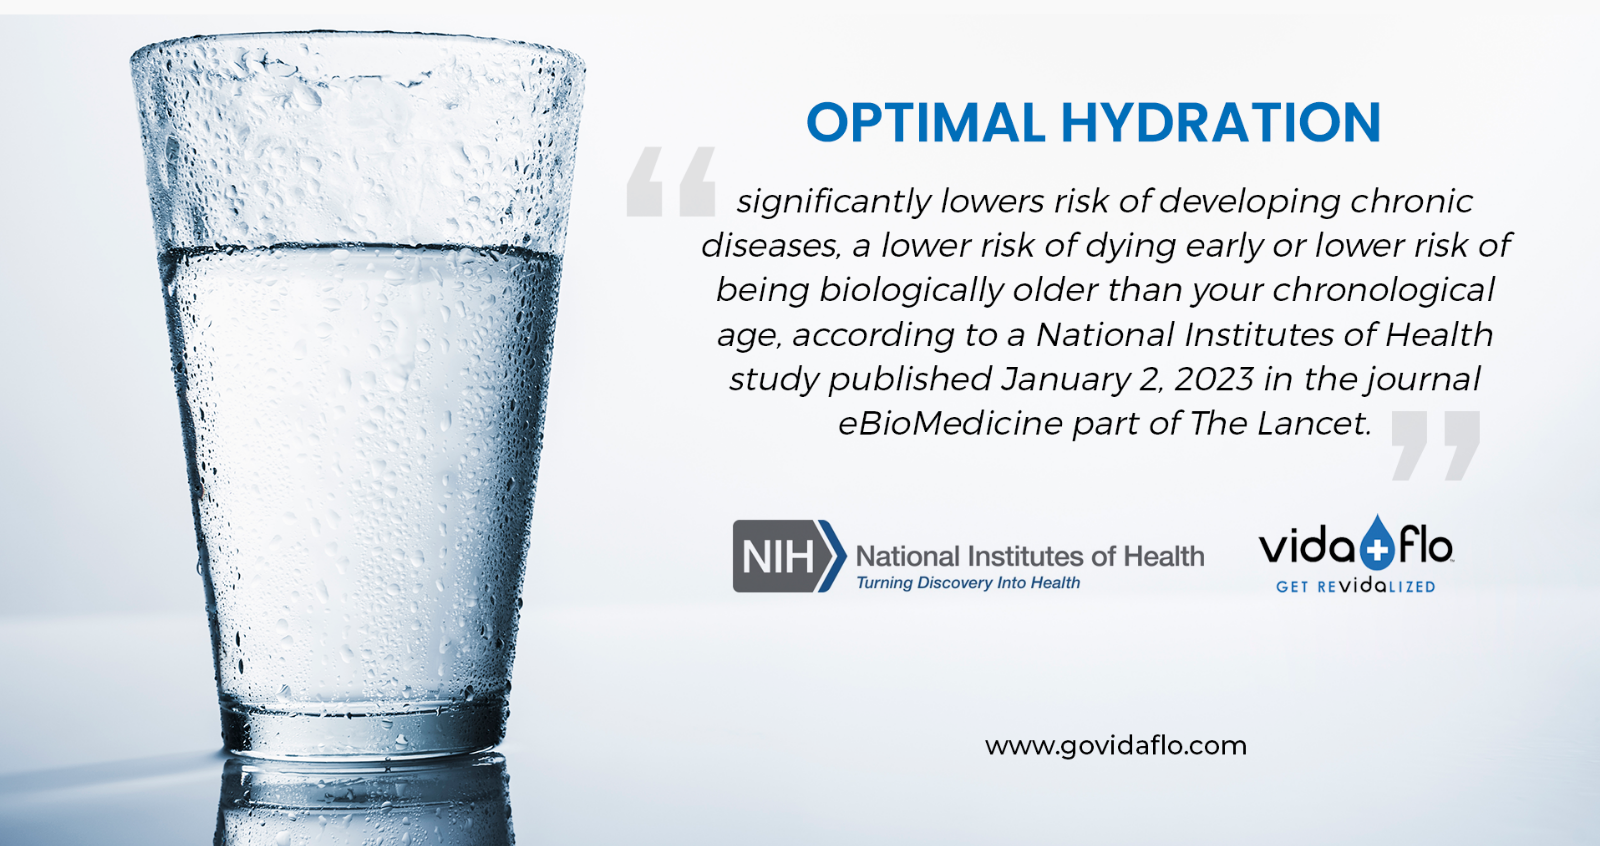 An image of a glass of water with a quote on optimal hydration in Nashville, TN.